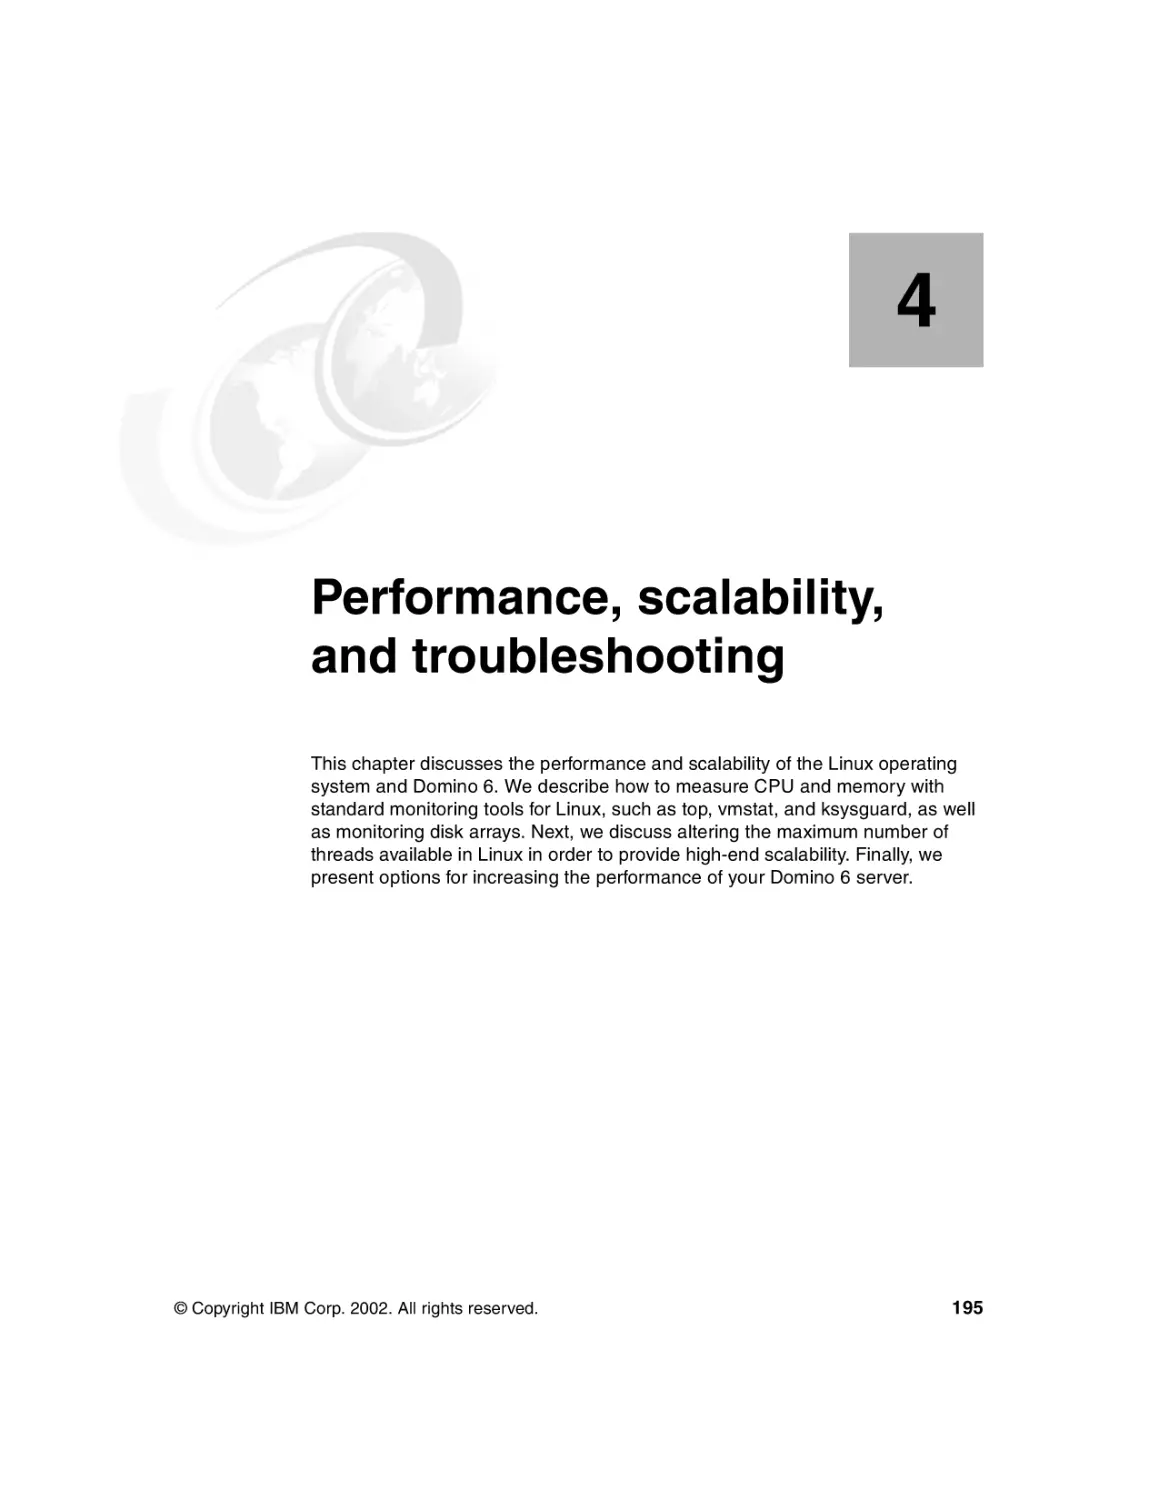 Chapter 4. Performance, scalability, and troubleshooting